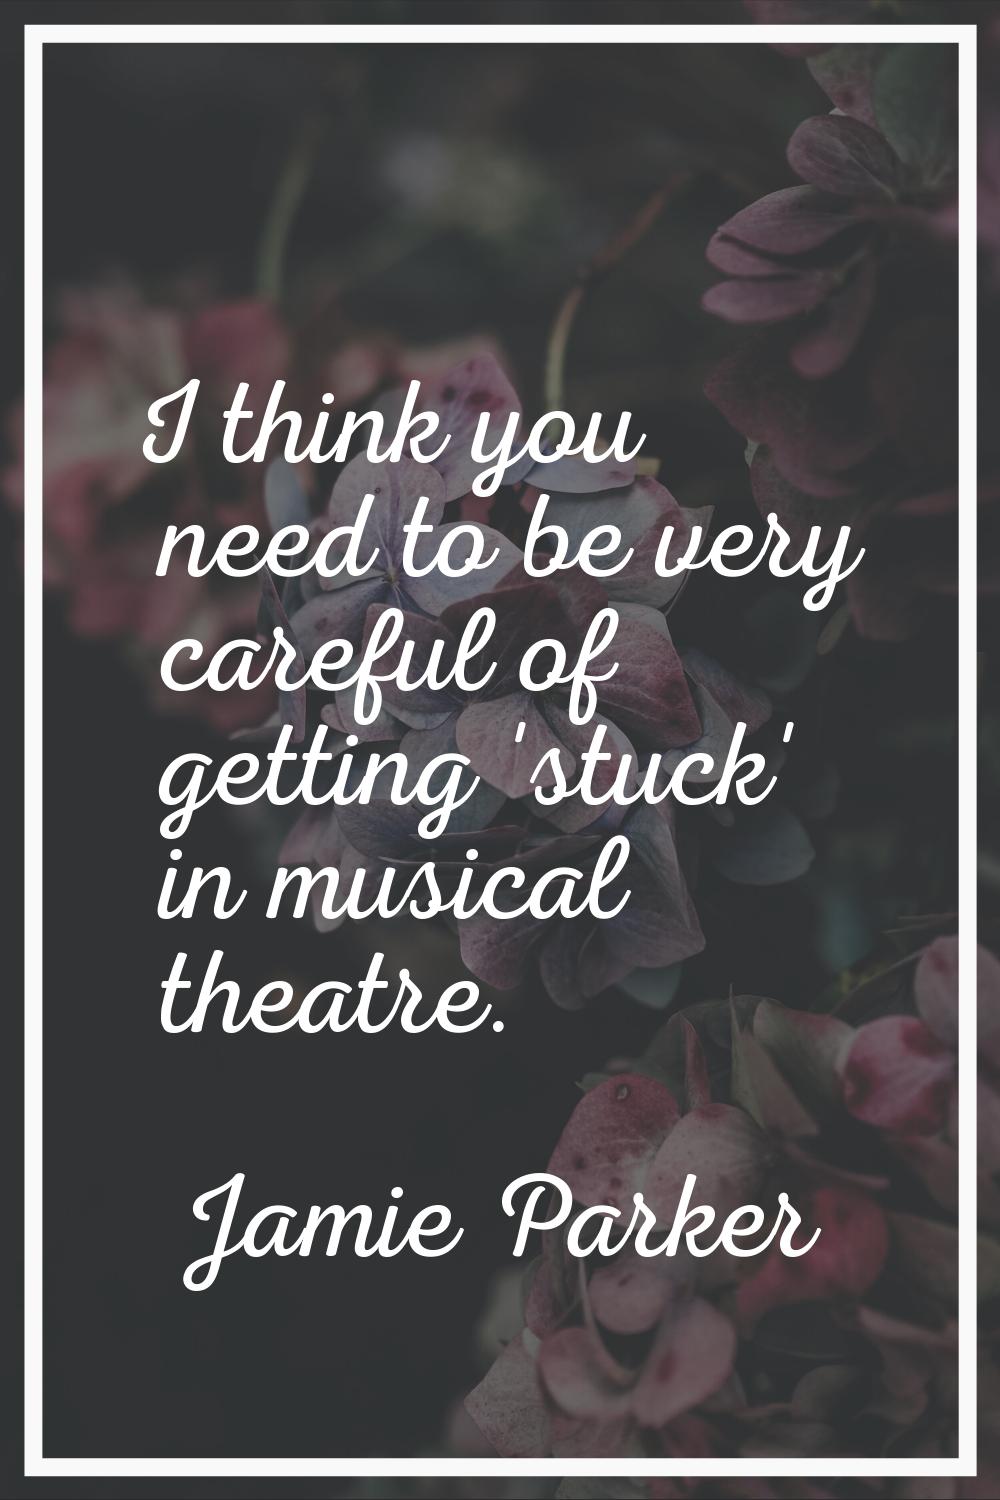 I think you need to be very careful of getting 'stuck' in musical theatre.